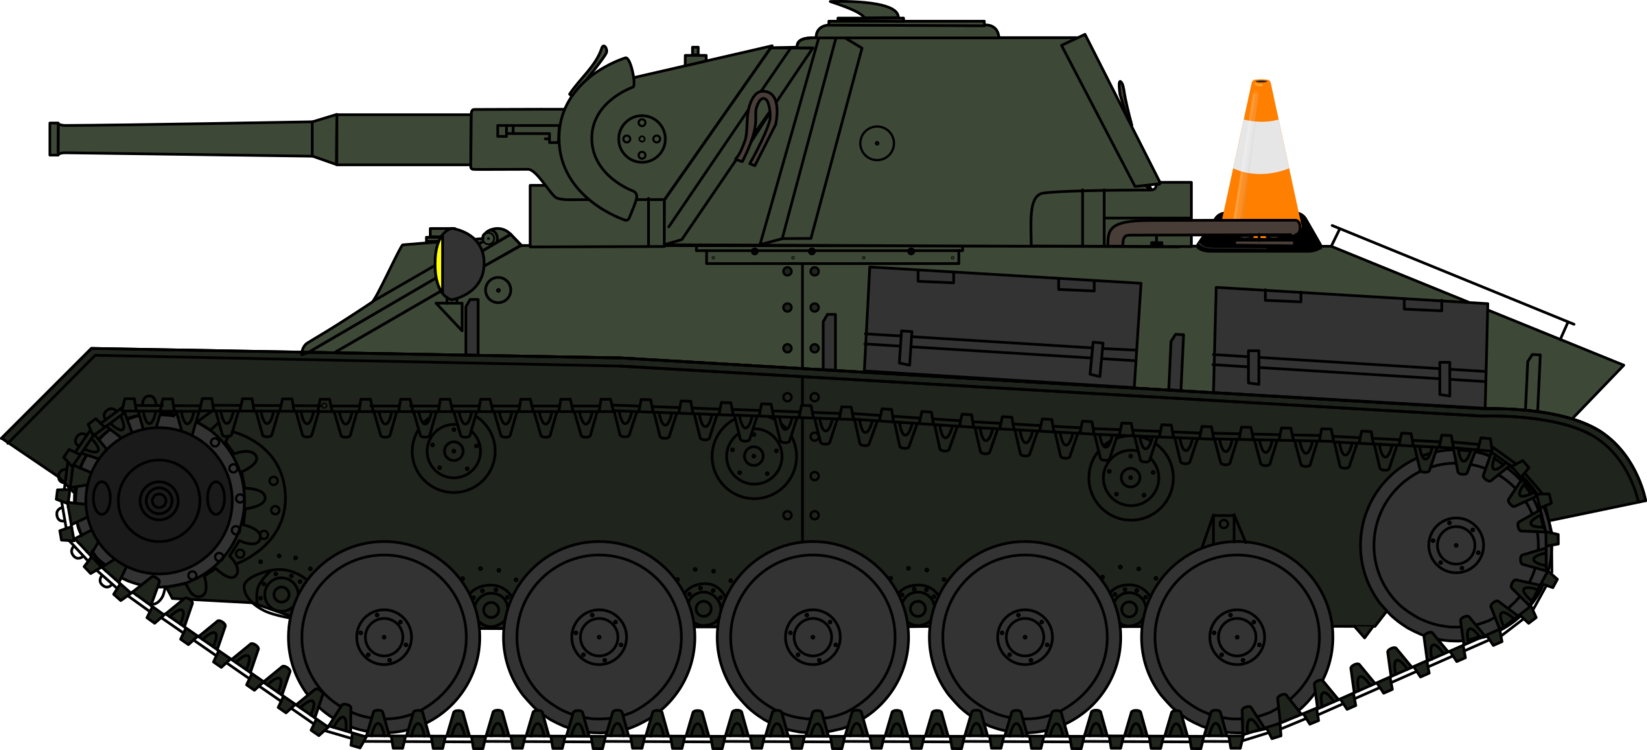 Tank Military Vehicle Soldier Army - Tank Military Vehicle Soldier Army (1647x750)